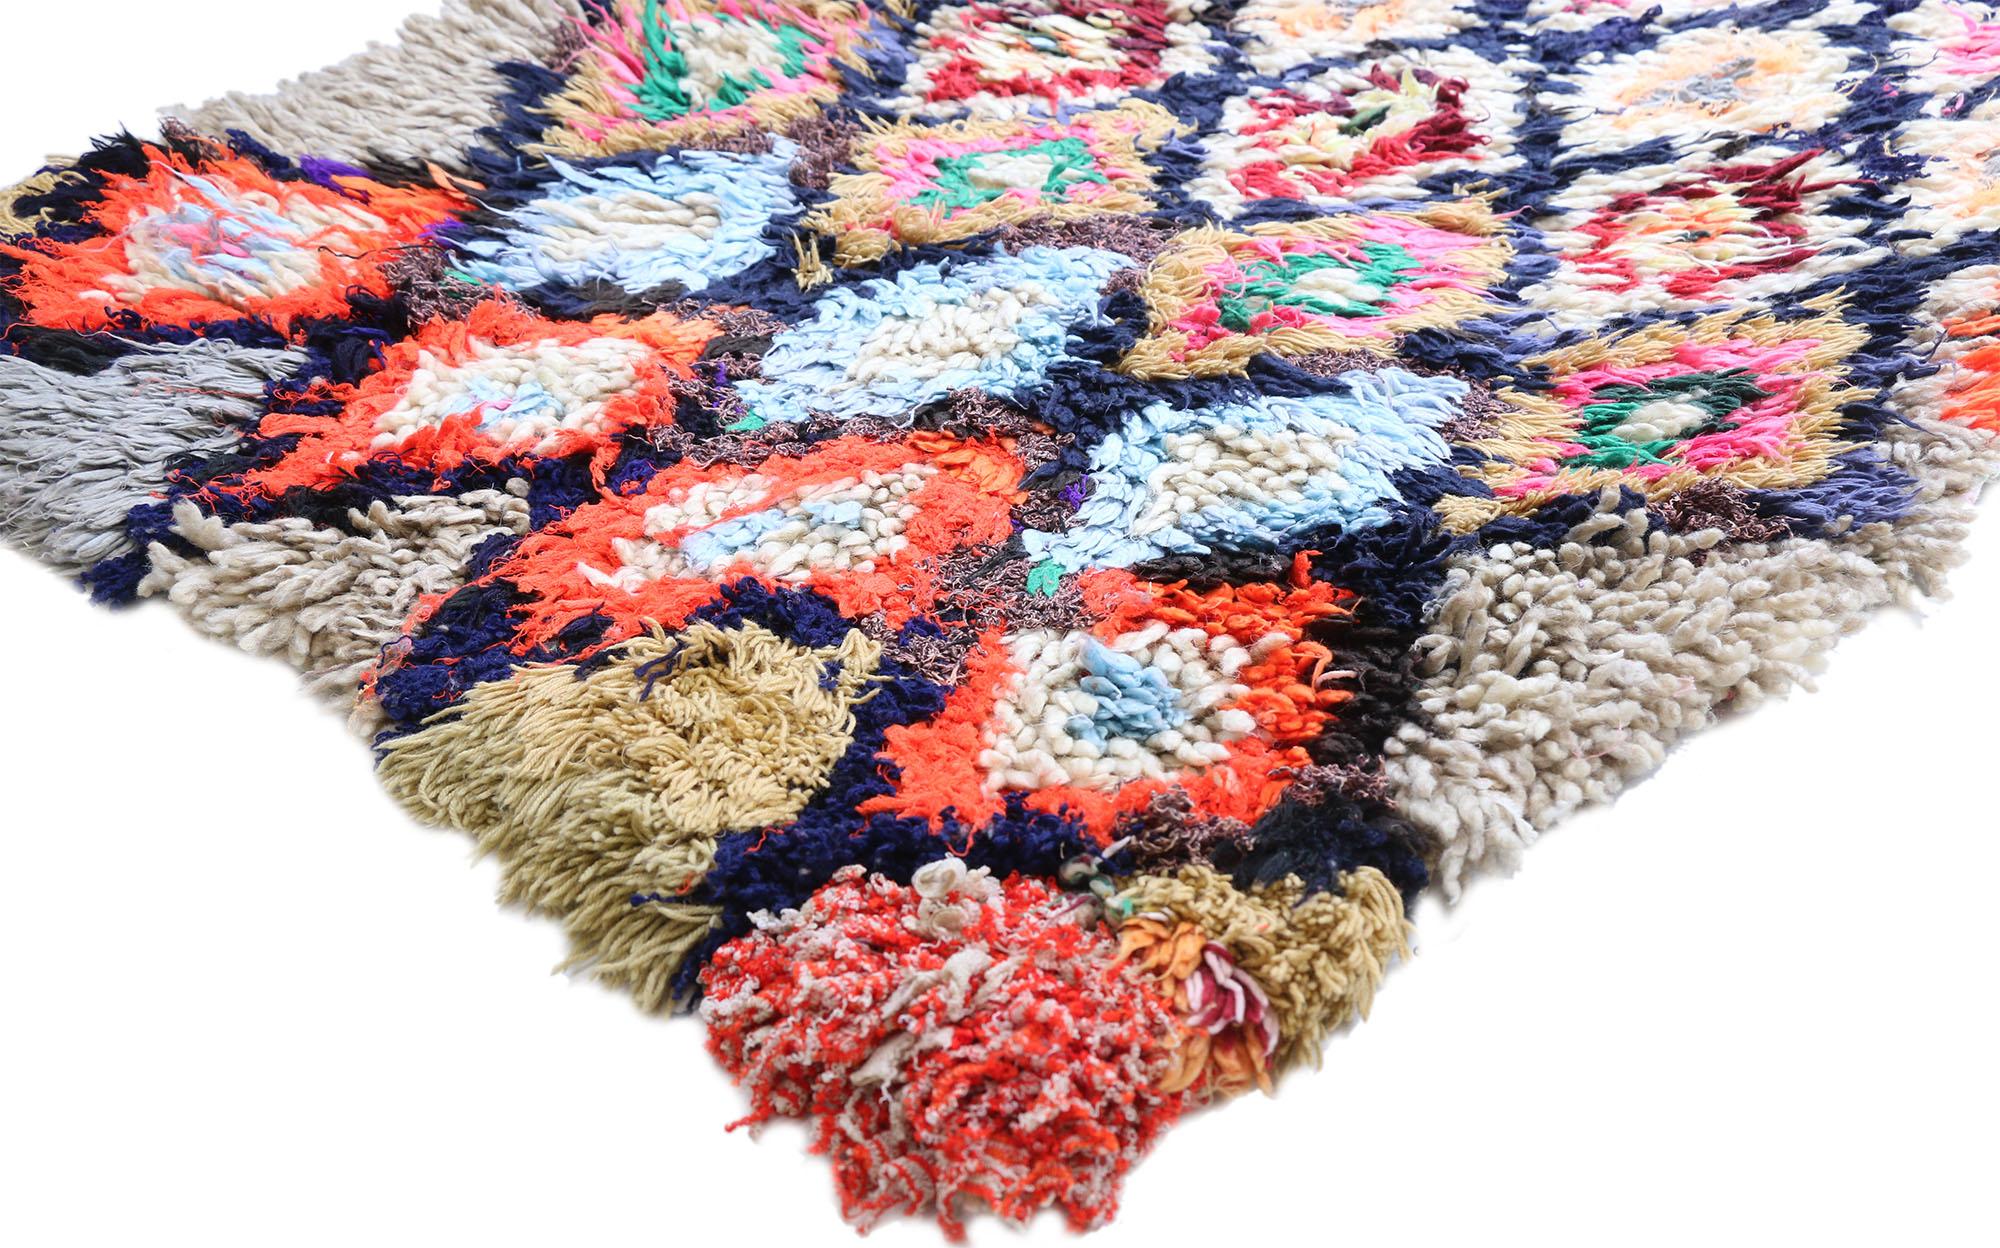 20842, vintage Moroccan Azilal rug, Berber colorful Boucherouite rug with tribal style. This vintage Moroccan Azilal rug features a column of seven diamond lattices unfolding across the middle of an abrashed creamy-beige field. The zigzag outlines